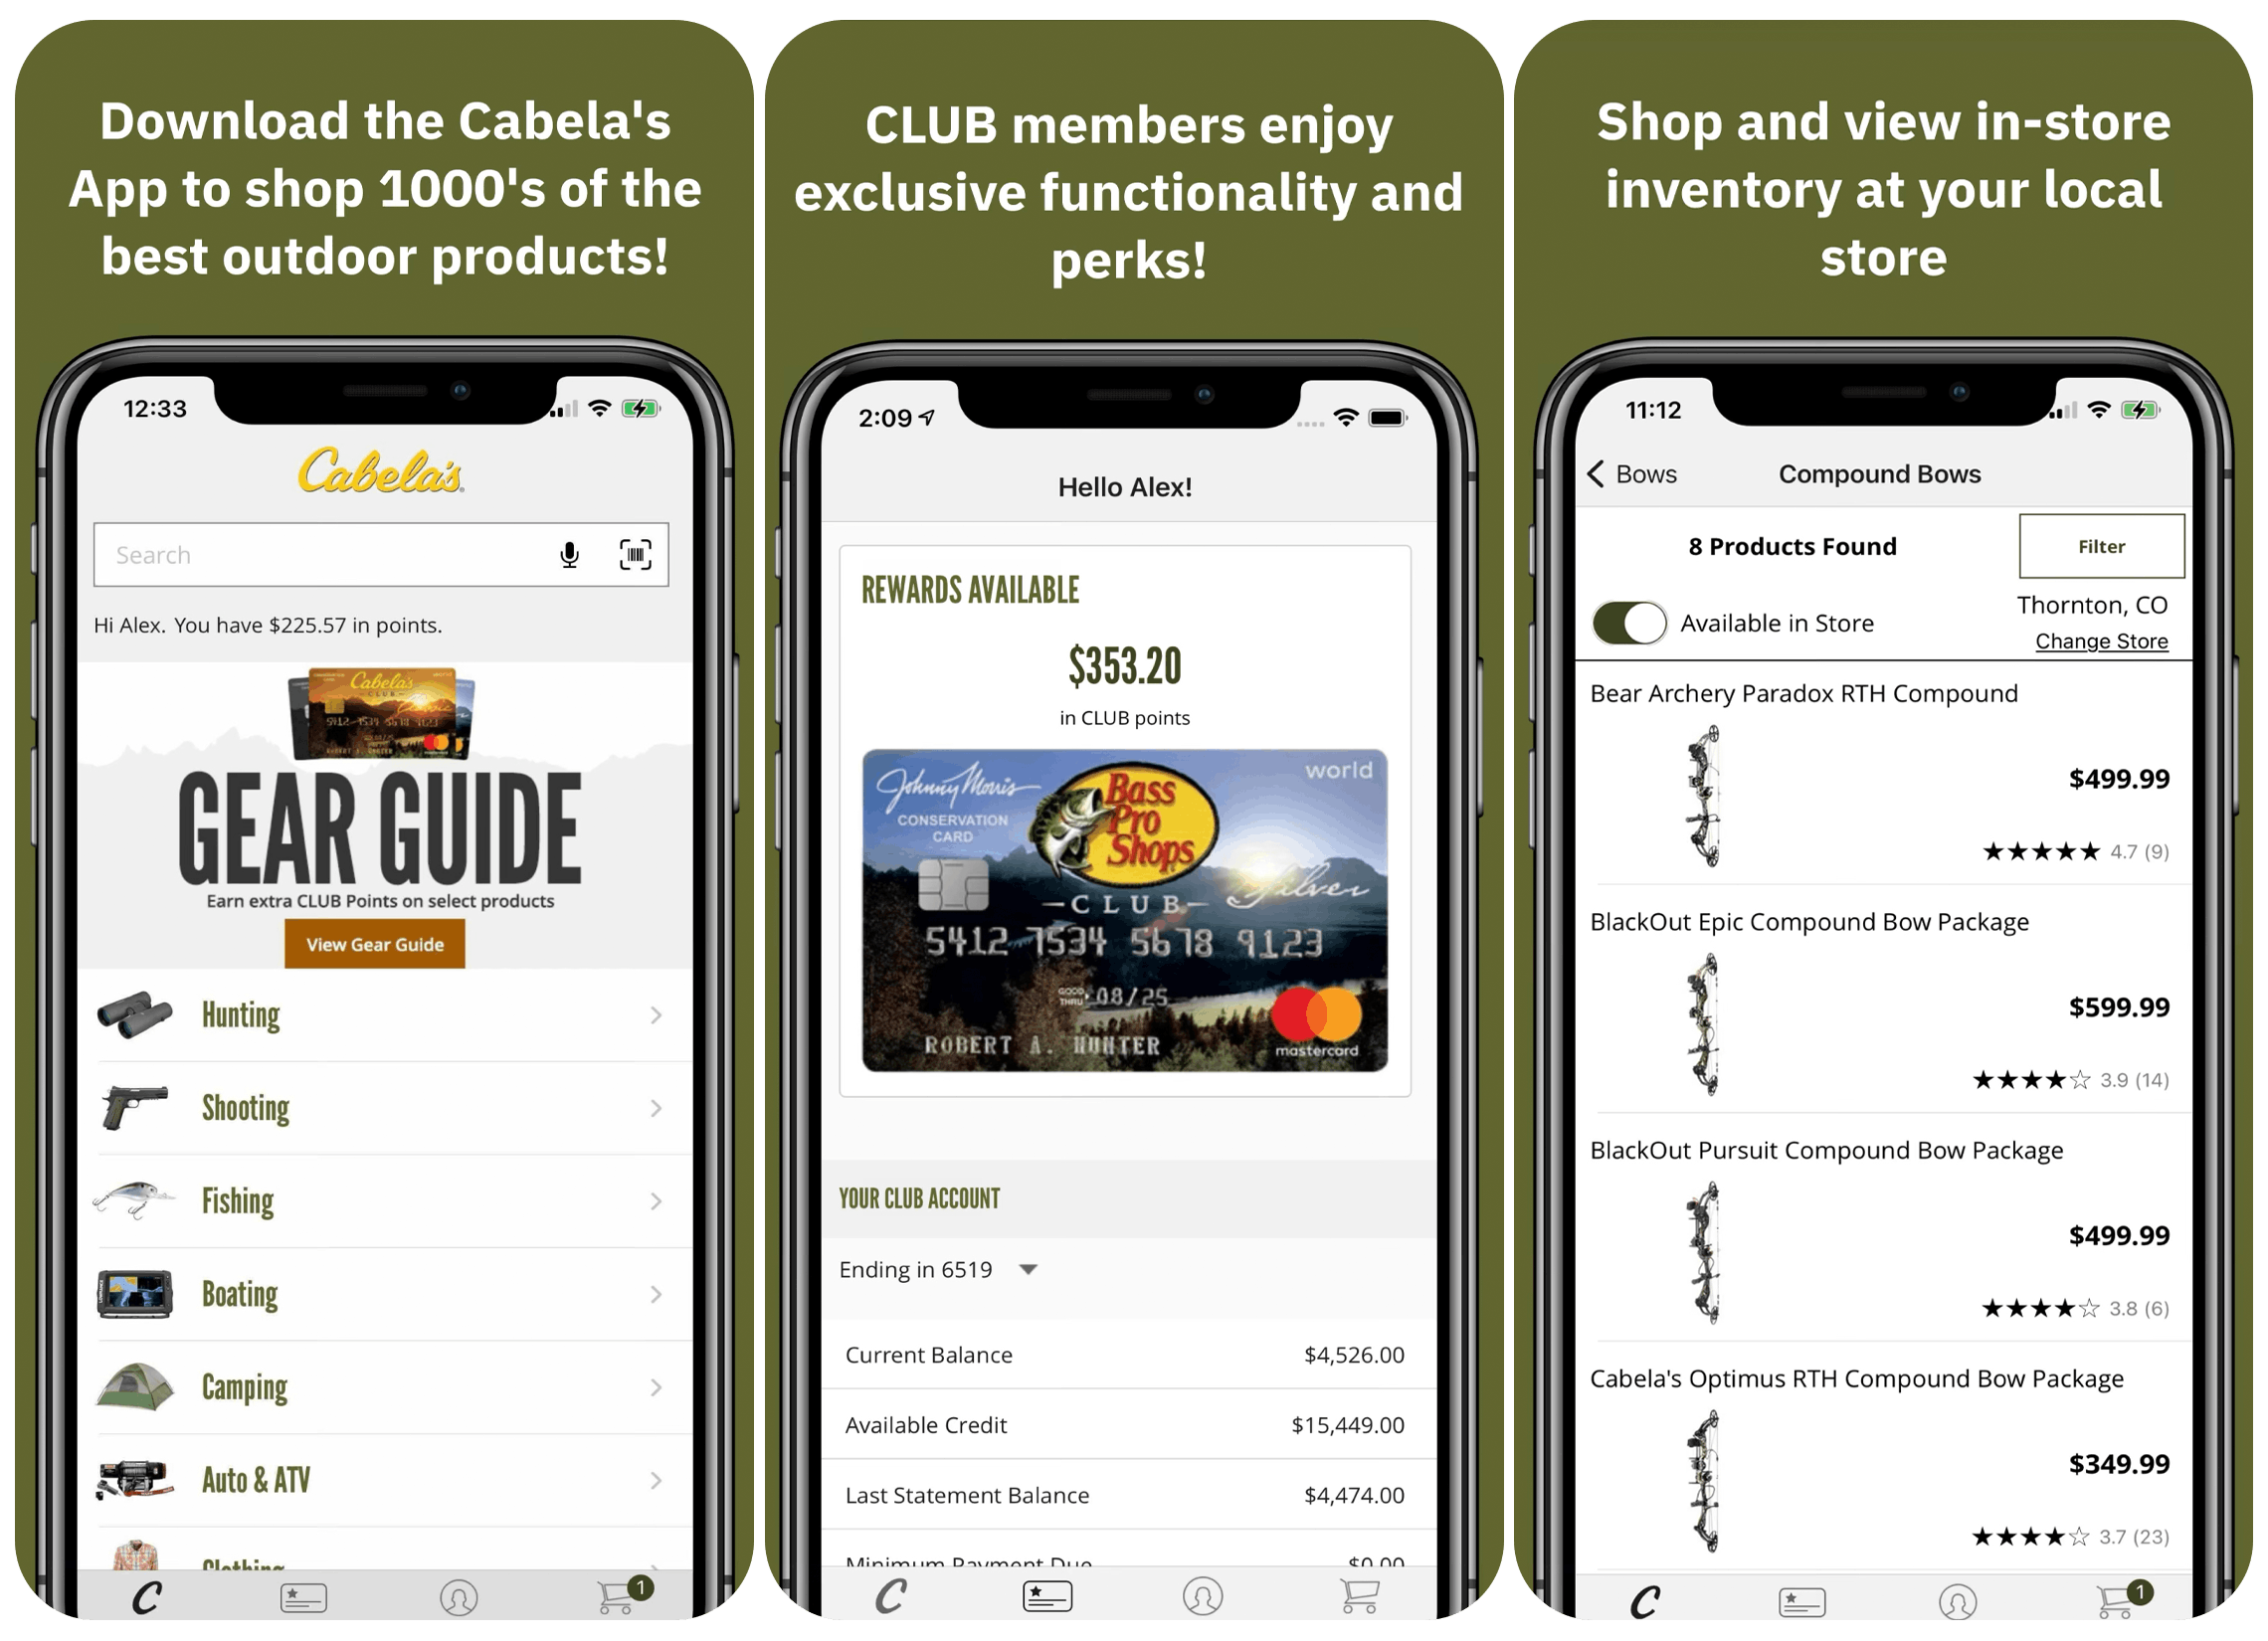 A graphic of three phones showing the Cabela's mobile app features.